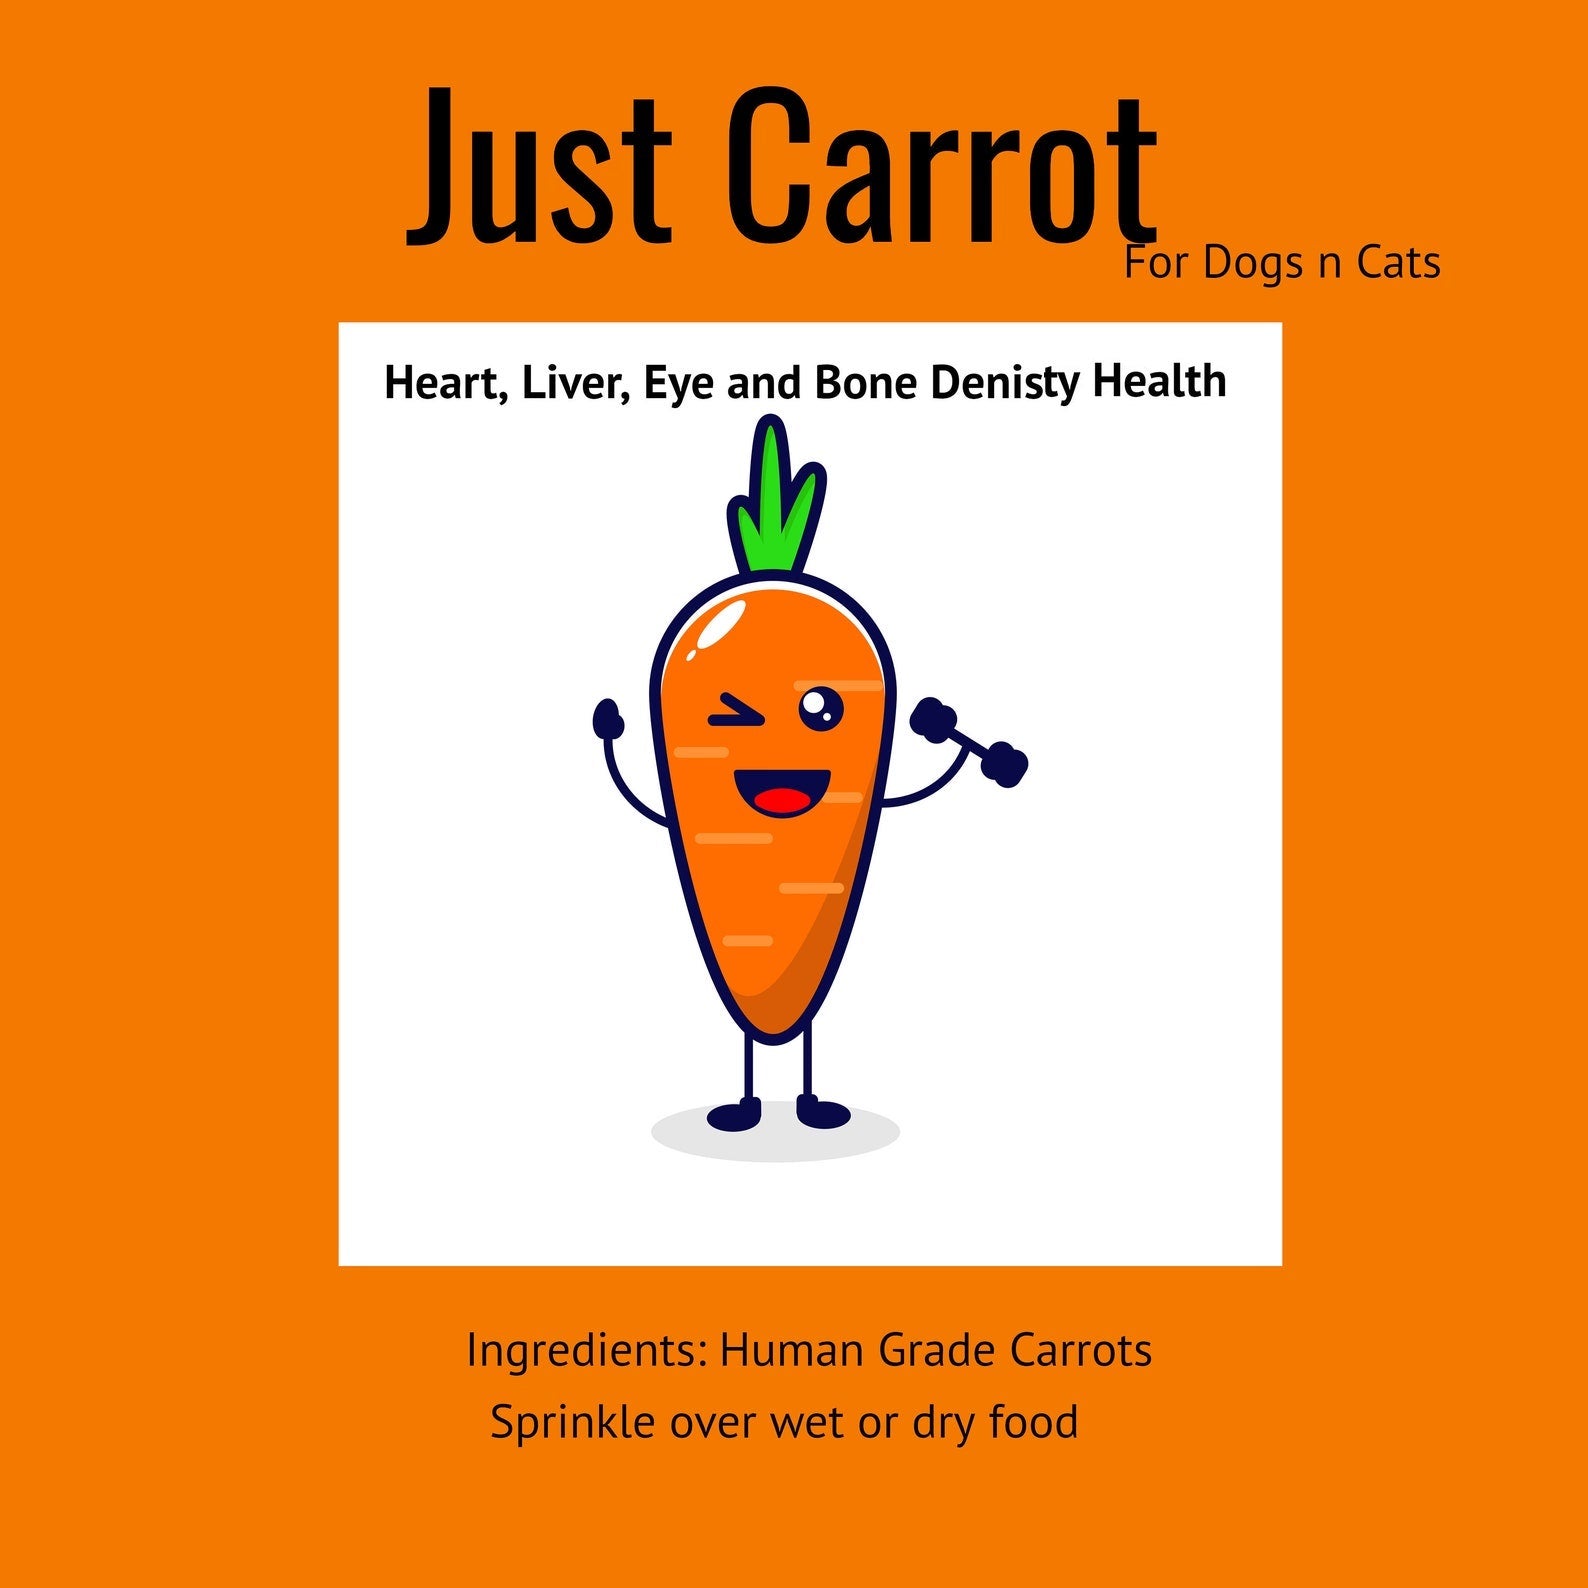 L'BARKERY - Just Carrot Meal Topper